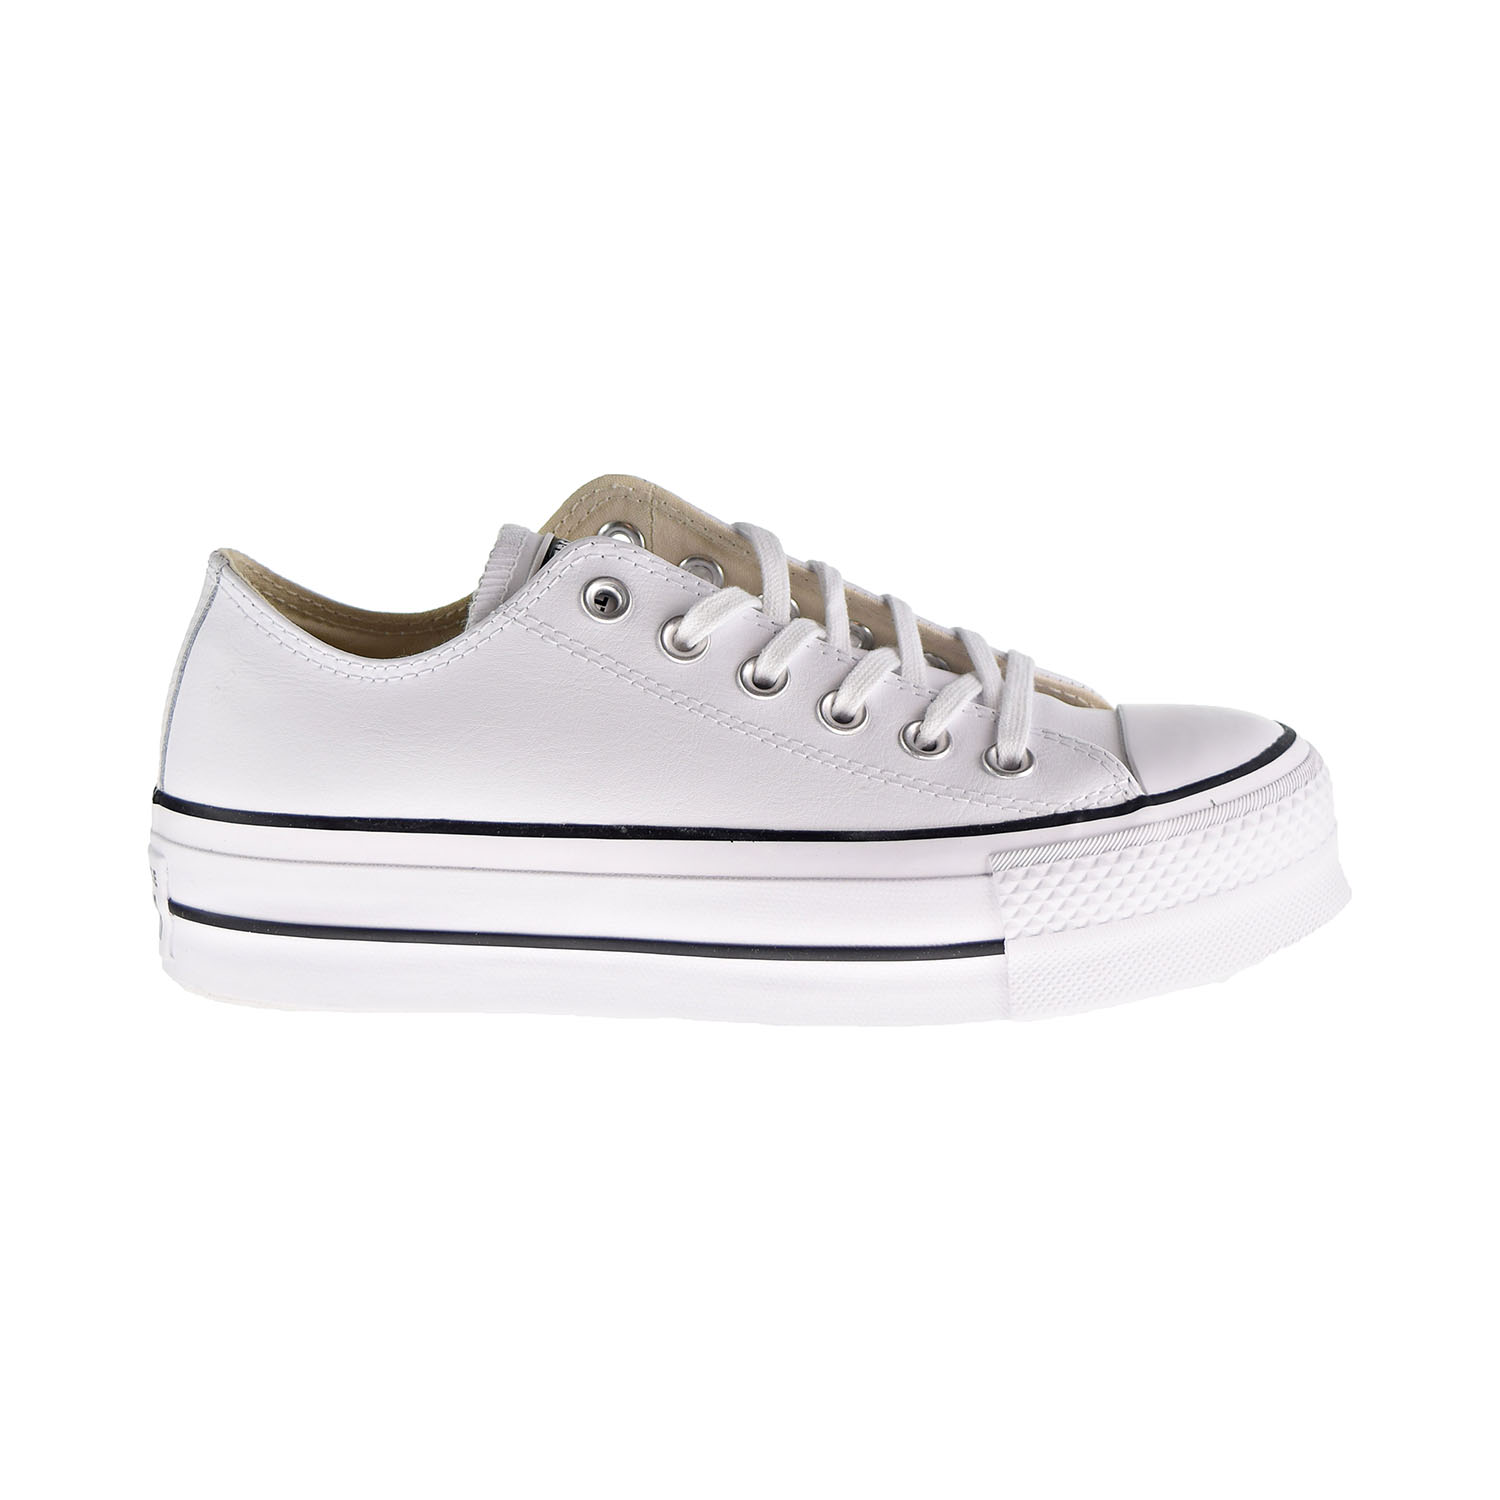 converse chuck taylor all star leather low top women's shoe